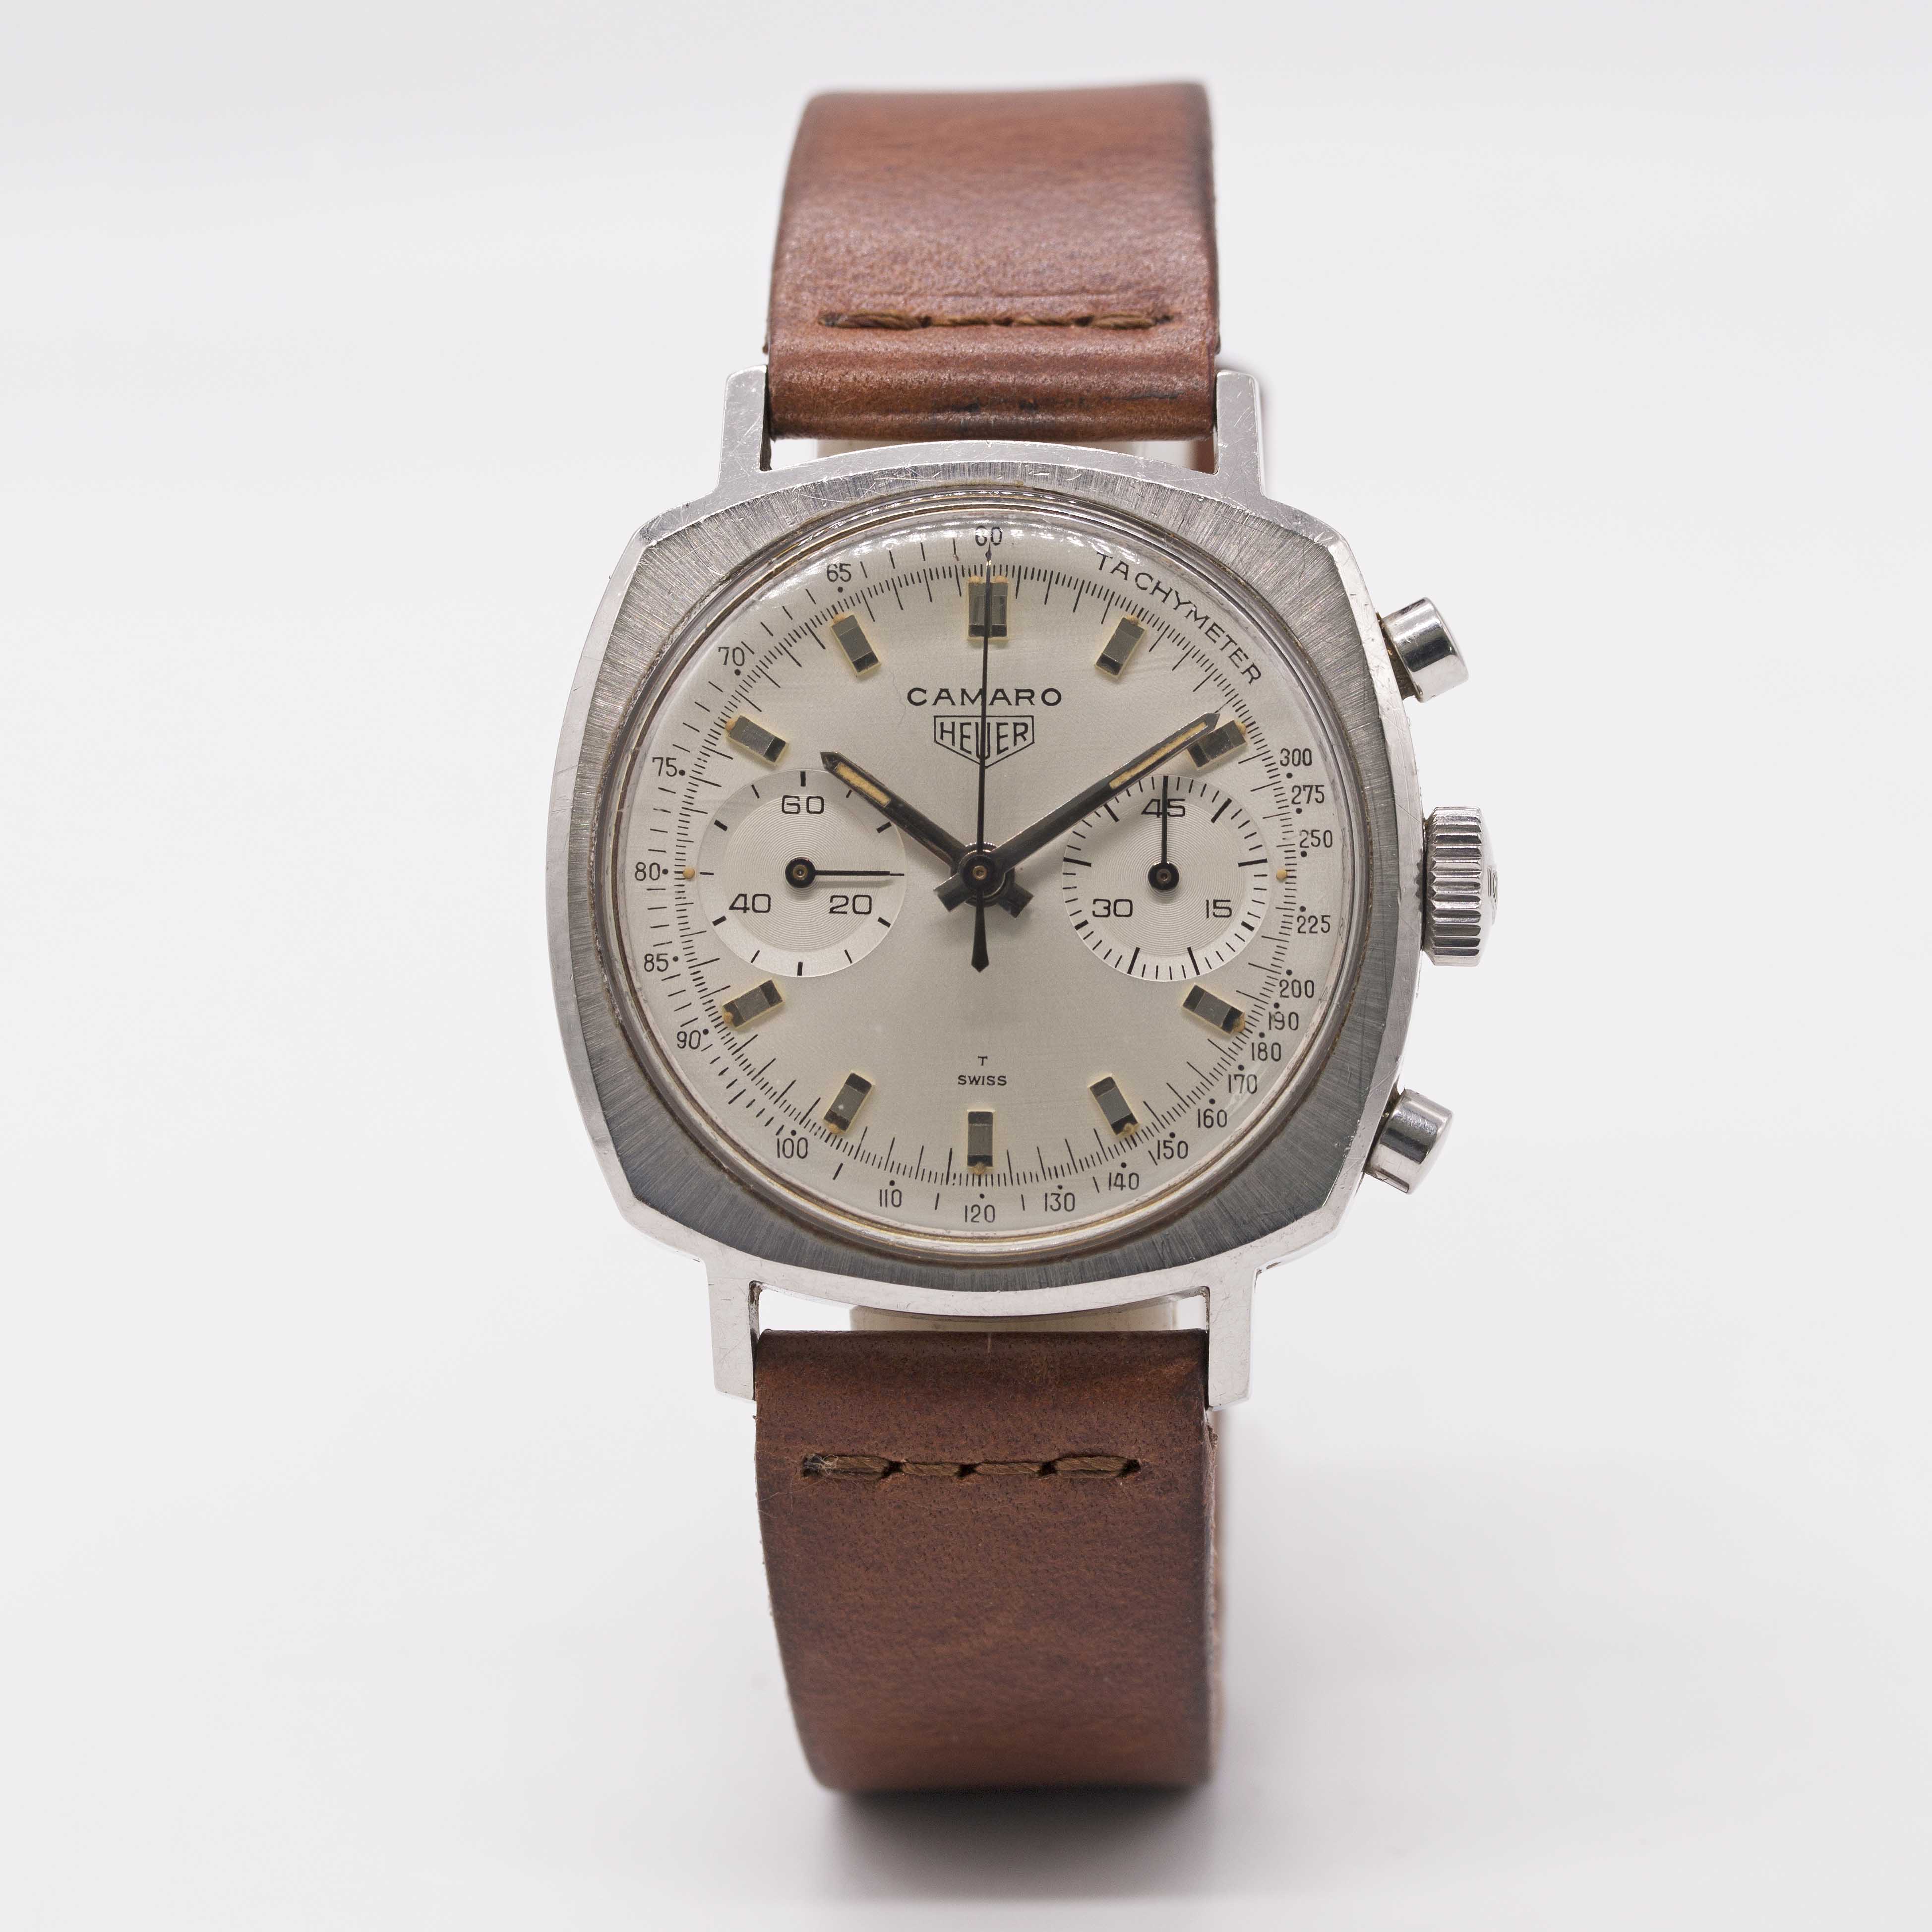 A GENTLEMAN'S STAINLESS STEEL HEUER CAMARO CHRONOGRAPH WRIST WATCH CIRCA 1970, REF. 9220T WITH - Image 2 of 9